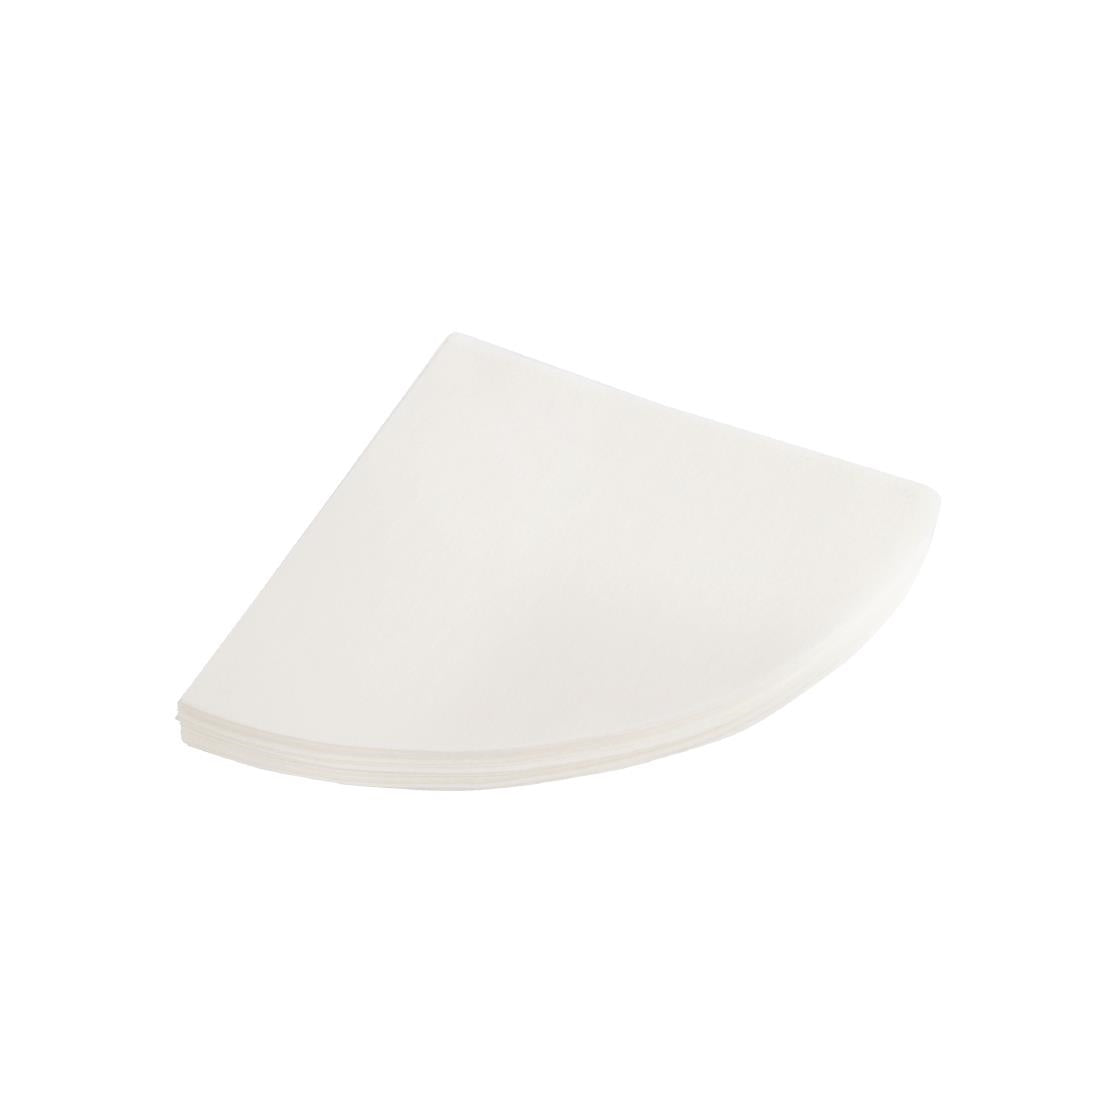 Filters for Vogue Grease Filter Cone (Pack of 50) JD Catering Equipment Solutions Ltd